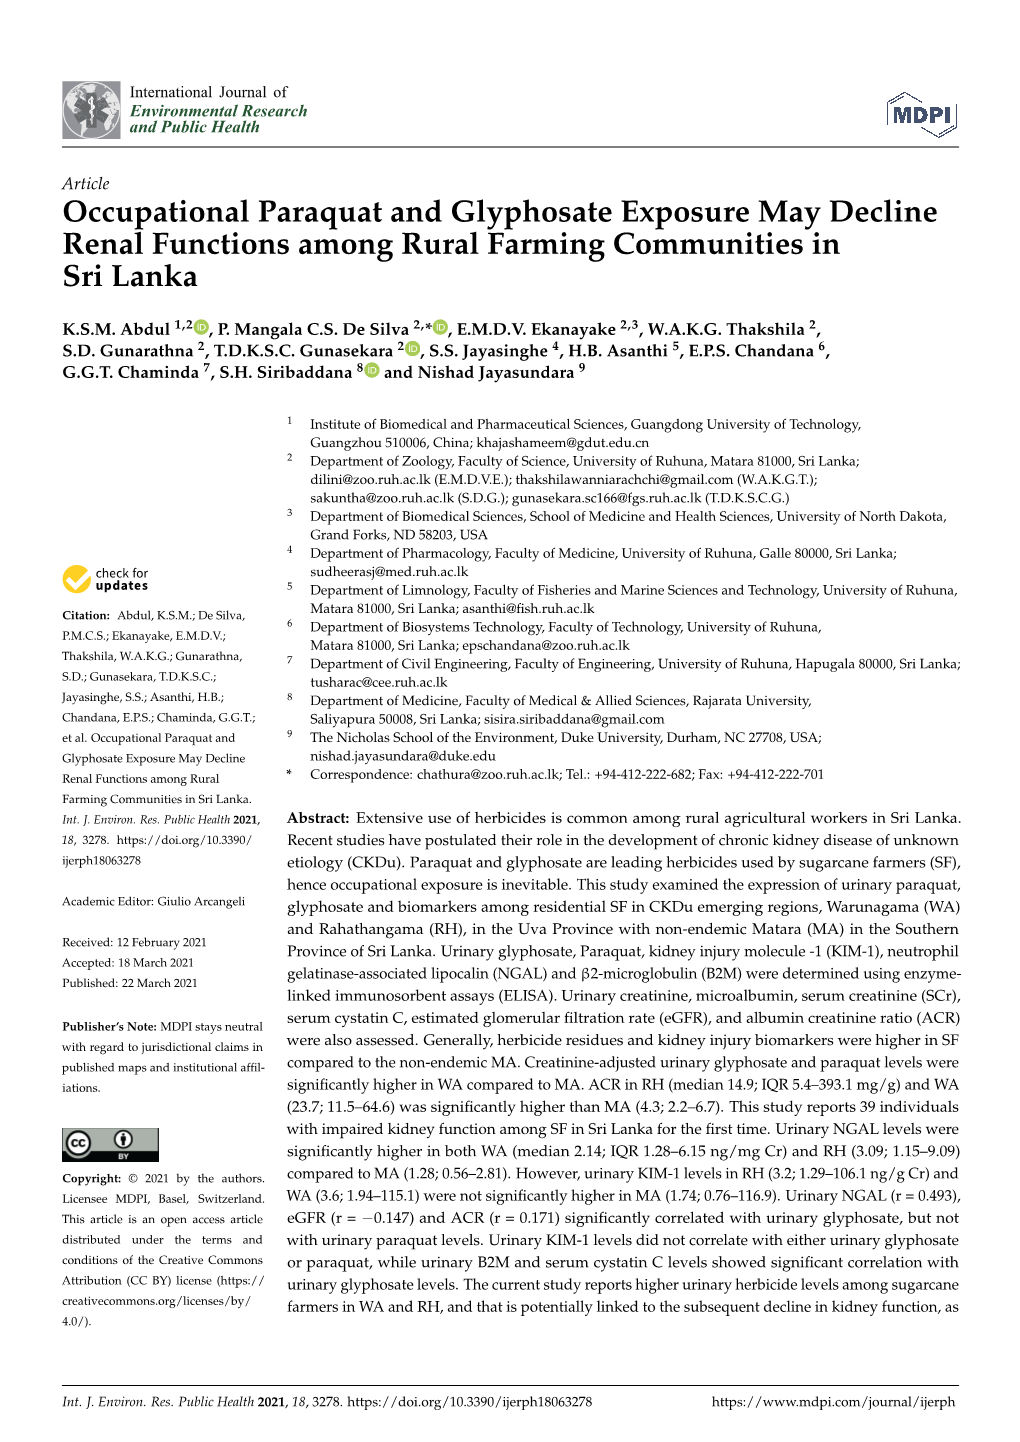 Occupational Paraquat and Glyphosate Exposure May Decline Renal Functions Among Rural Farming Communities in Sri Lanka